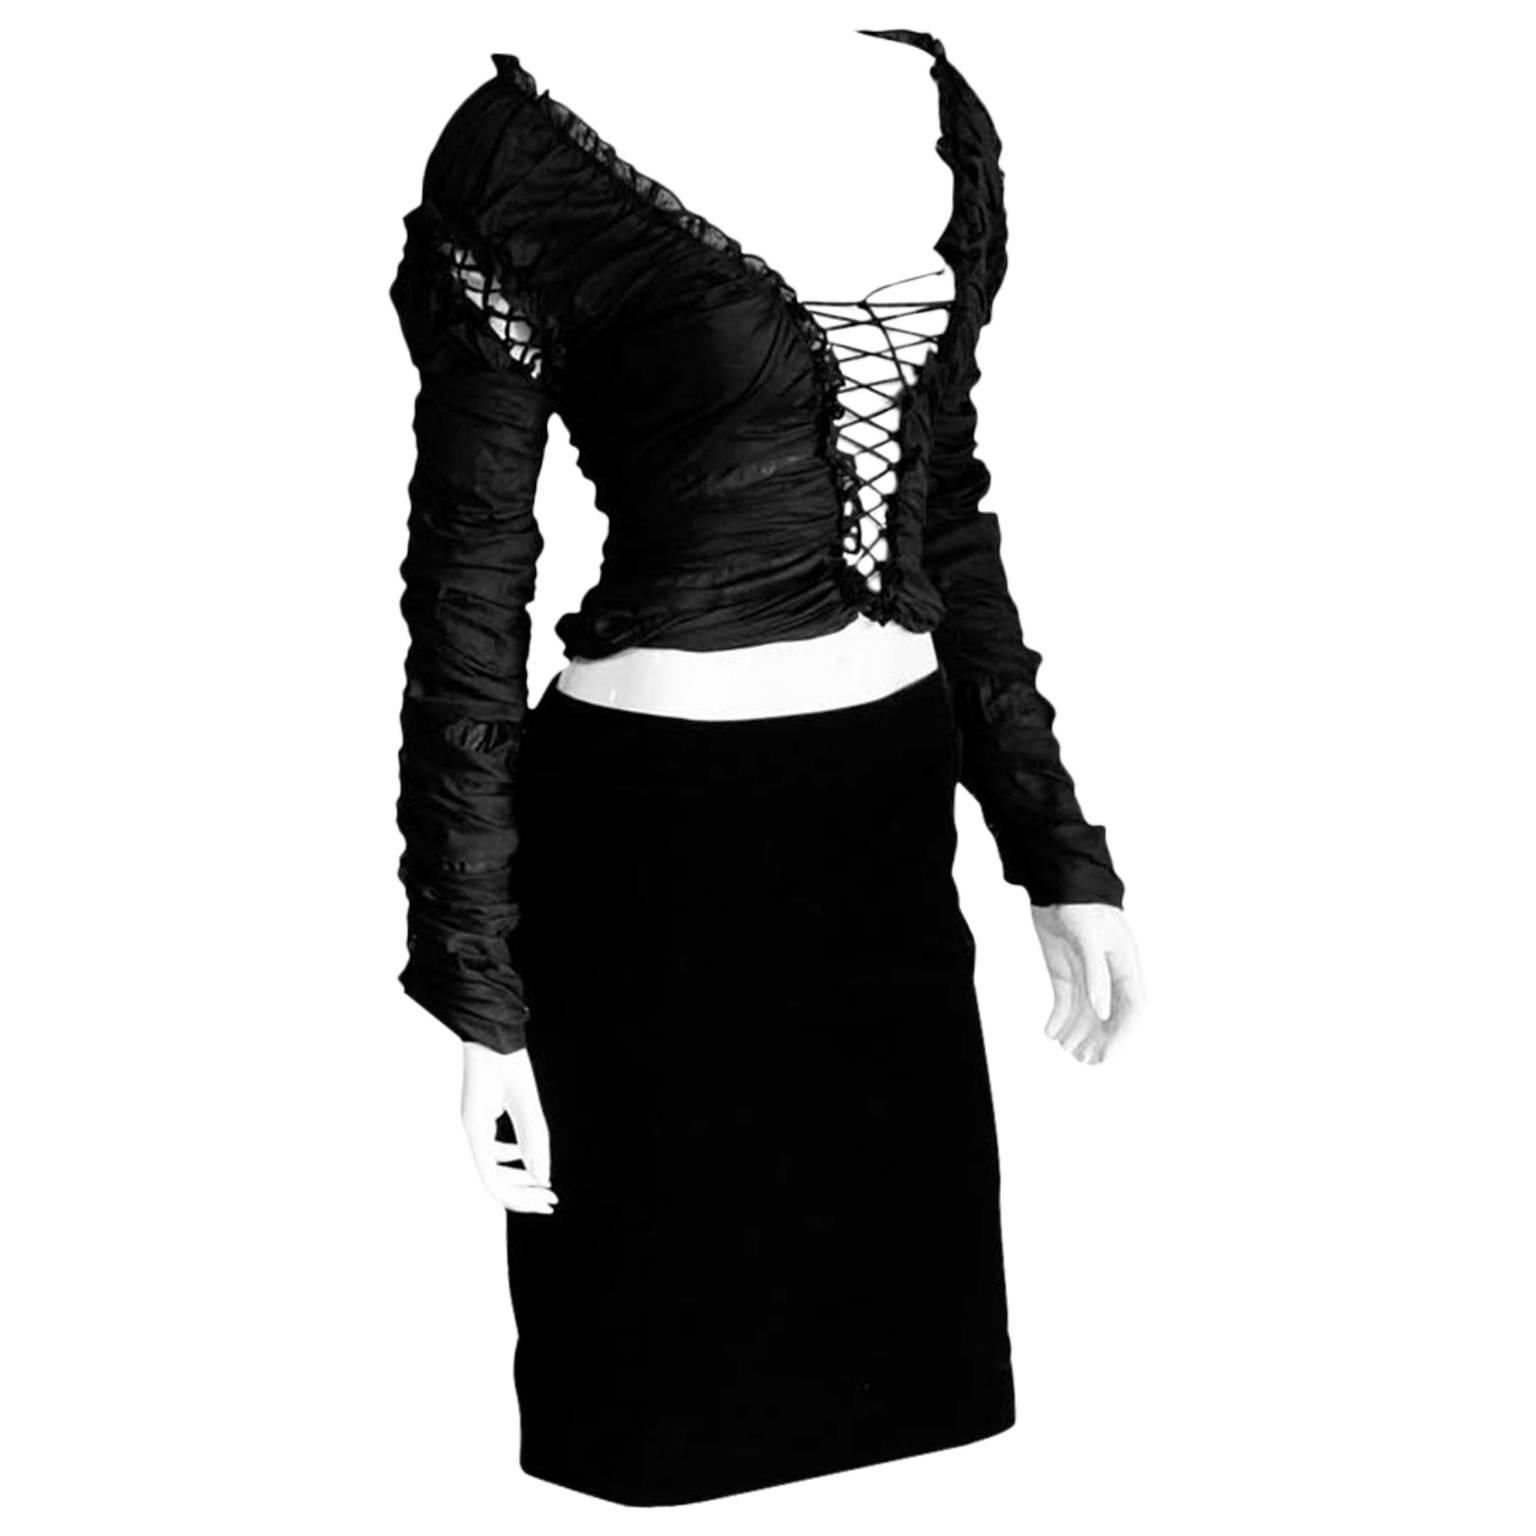 Iconic Tom Ford For YSL Rive Gauche FW 2001 "Mummy" Runway Blouse & Skirt! FR 38